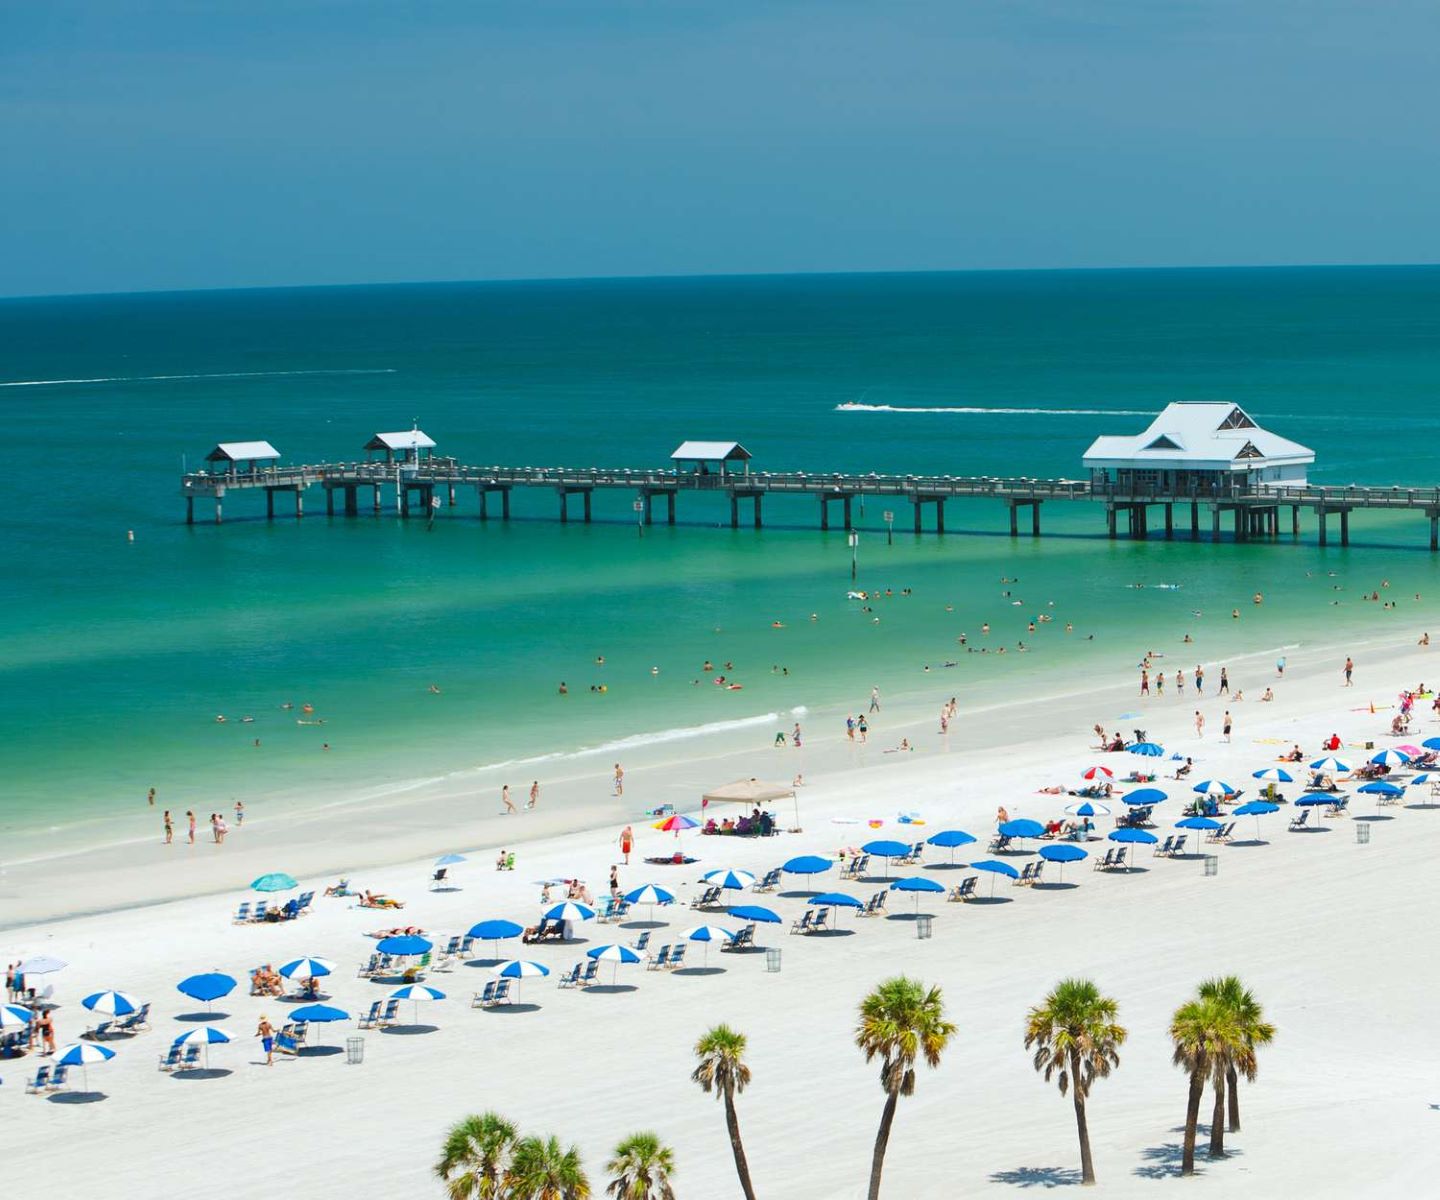 Discover Tampa’s Hidden Gem Beaches Away From The Crowds Of Clearwater And St. Pete!